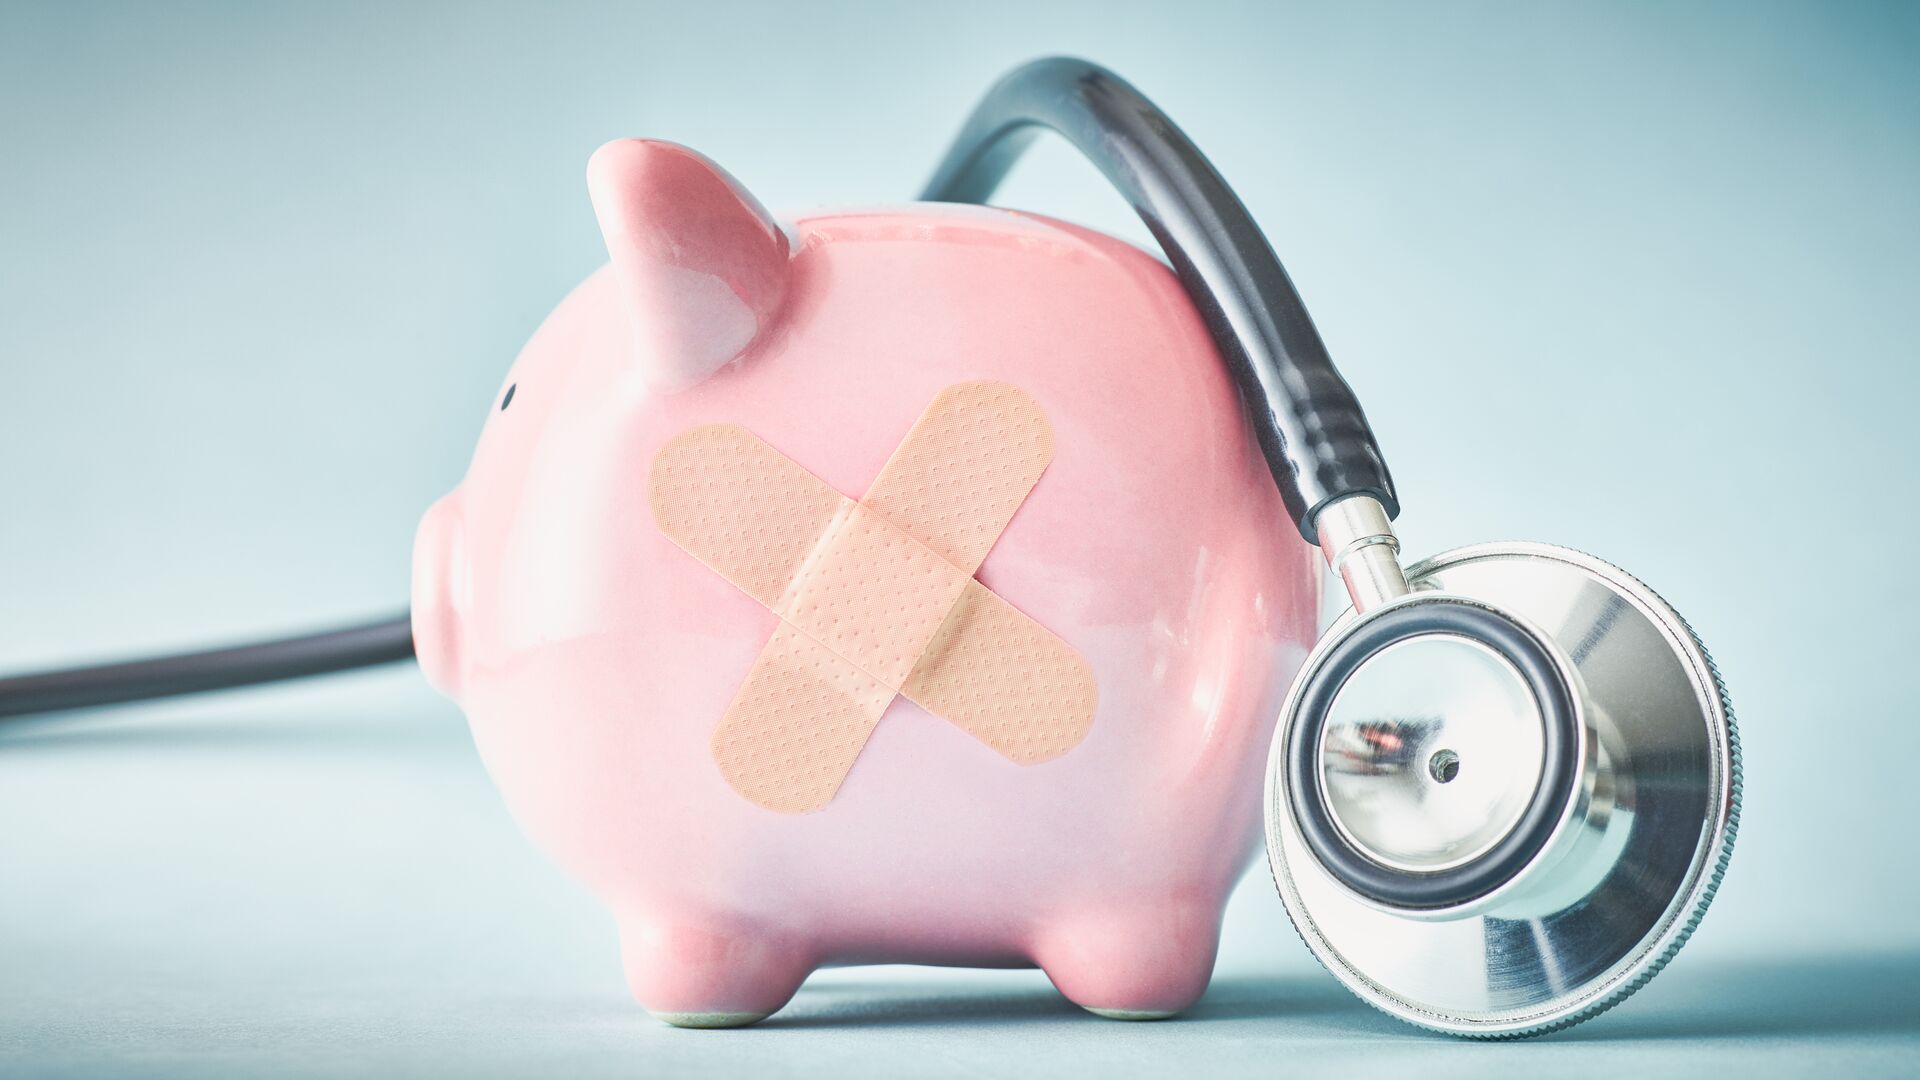 Glen Tullman, Chairman and CEO of Transcarent discusses leveraging technology to deliver high quality lower-cost healthcare. The image is of a piggy bank in need of medical attention. It has a bandaid across its torso representative of the need to curve and reassess health care spending.